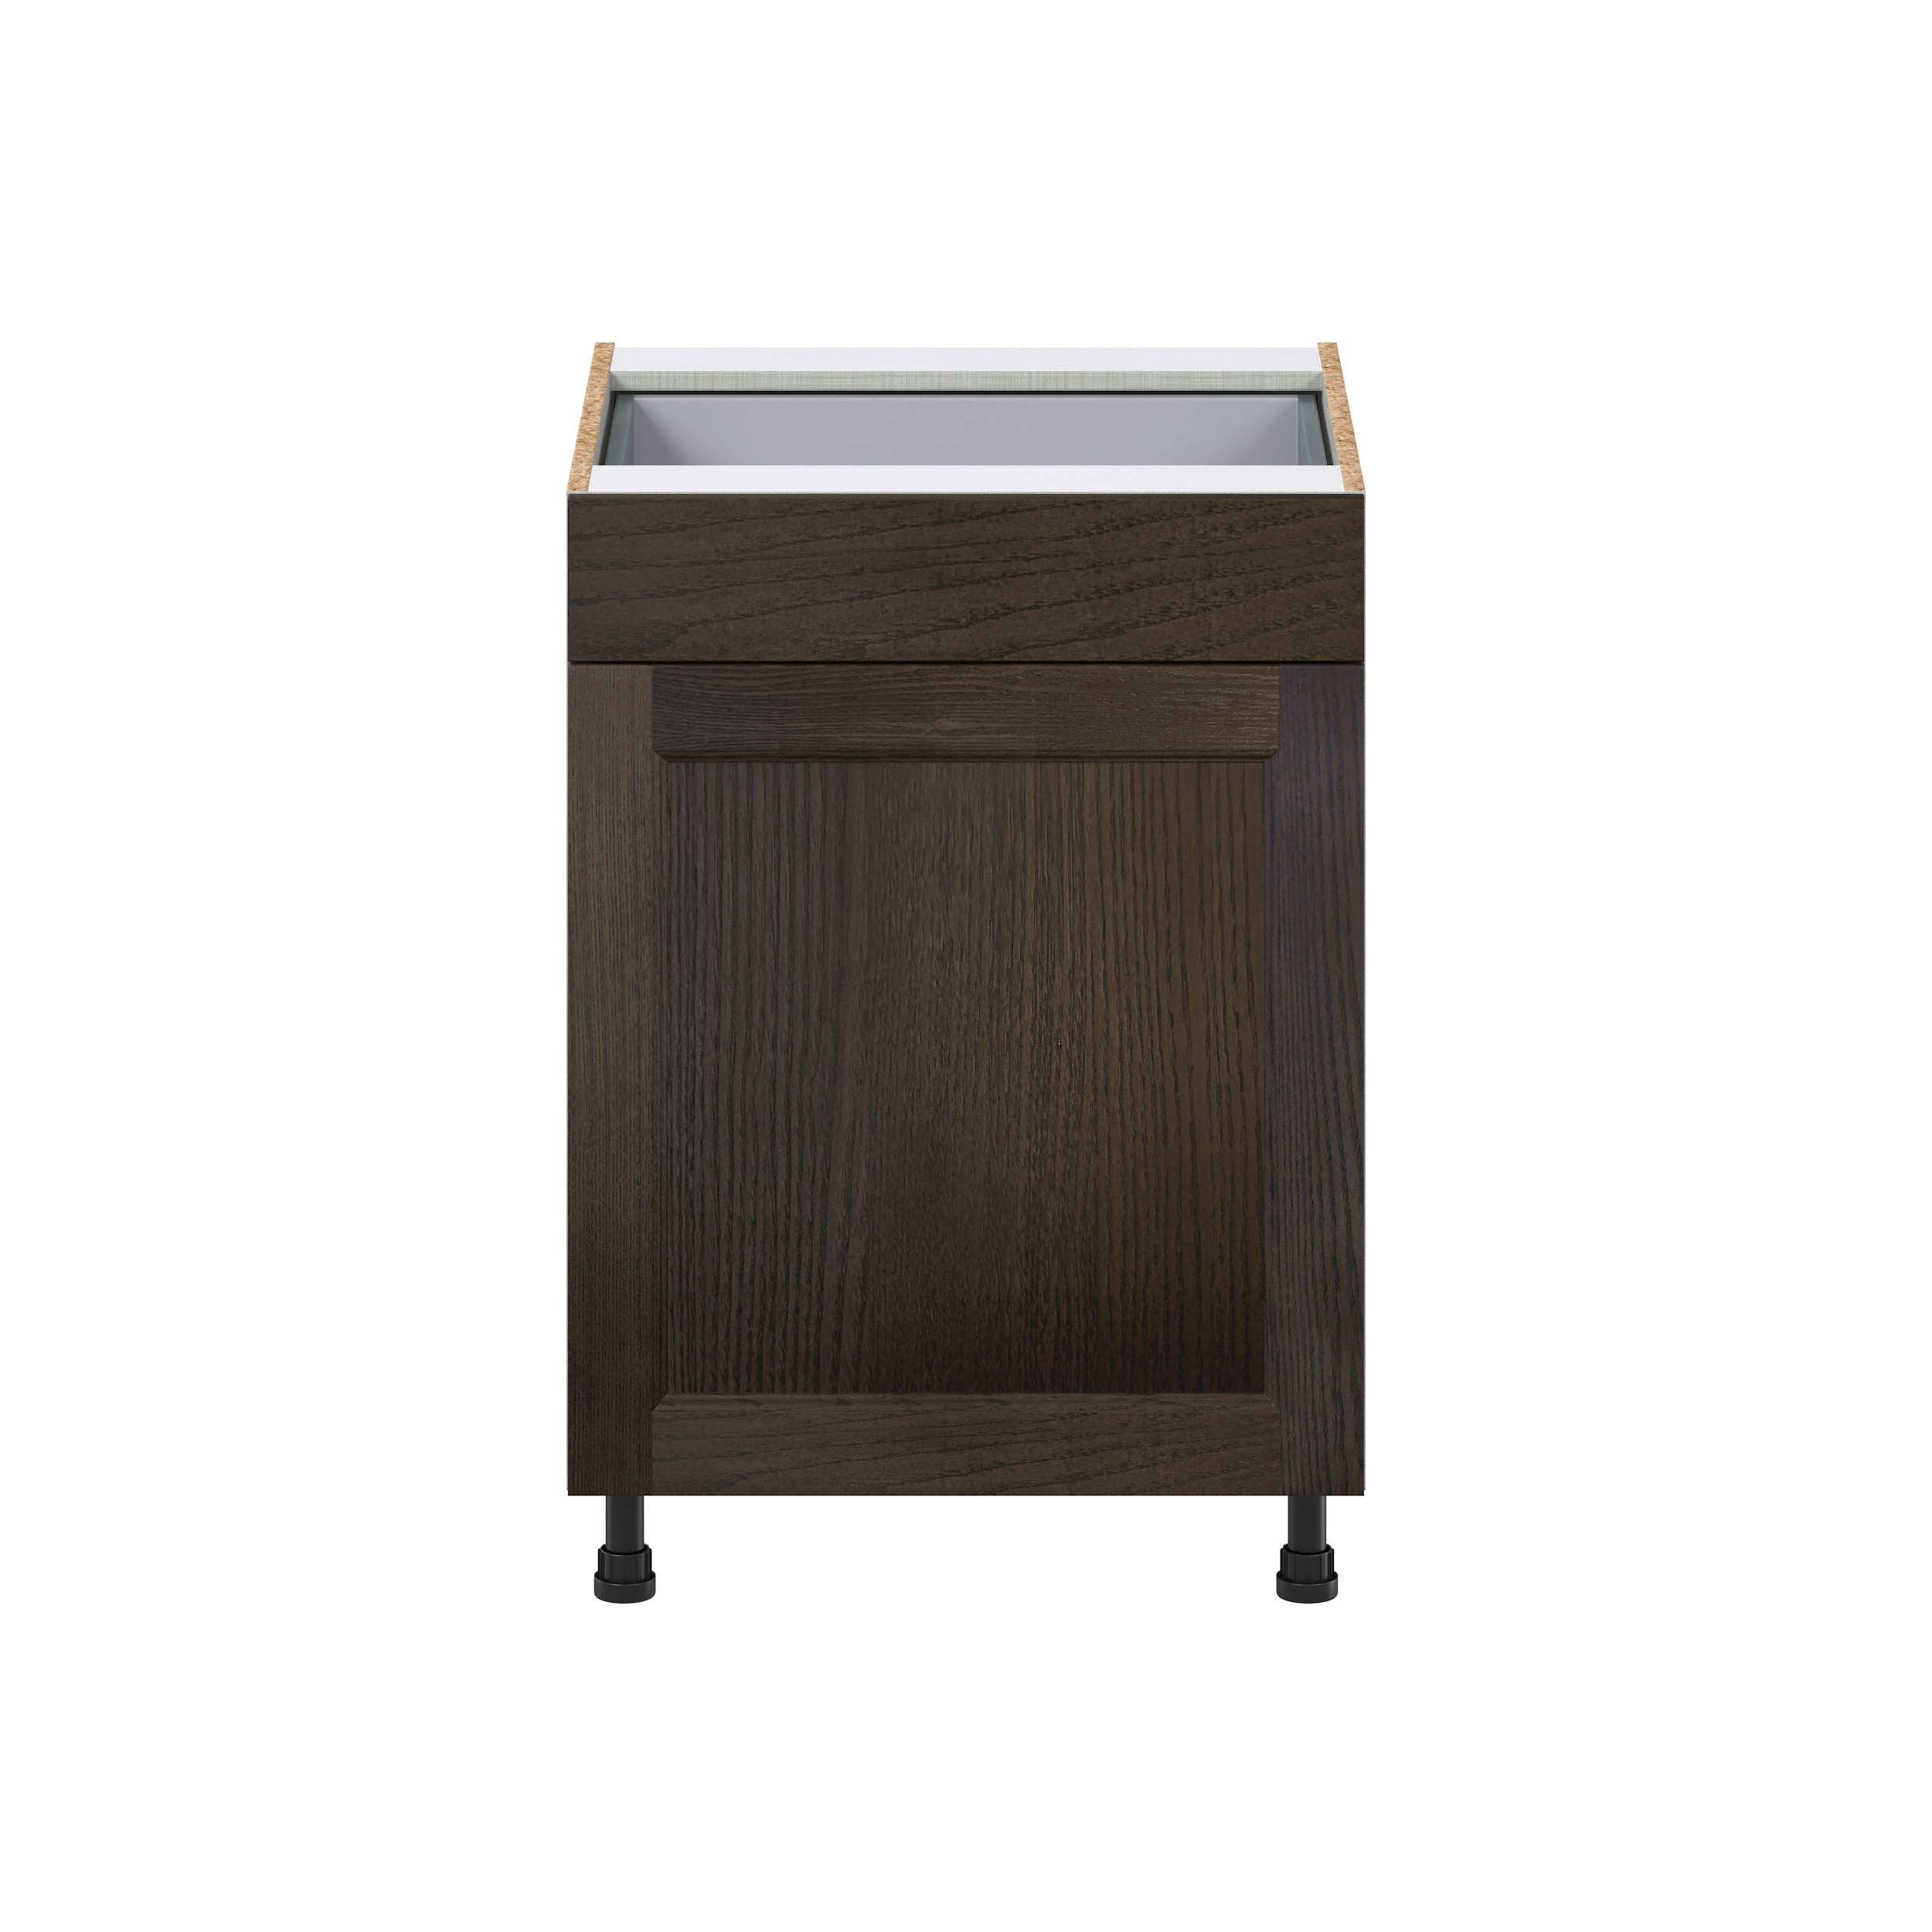 Summerina Chestnut Solid Wood Recessed Assembled with 1 Drawer and Pull Out  3 Waste Bins Kitchen Cabinet (24in. W x 34.5 in. H x 24 in. D)